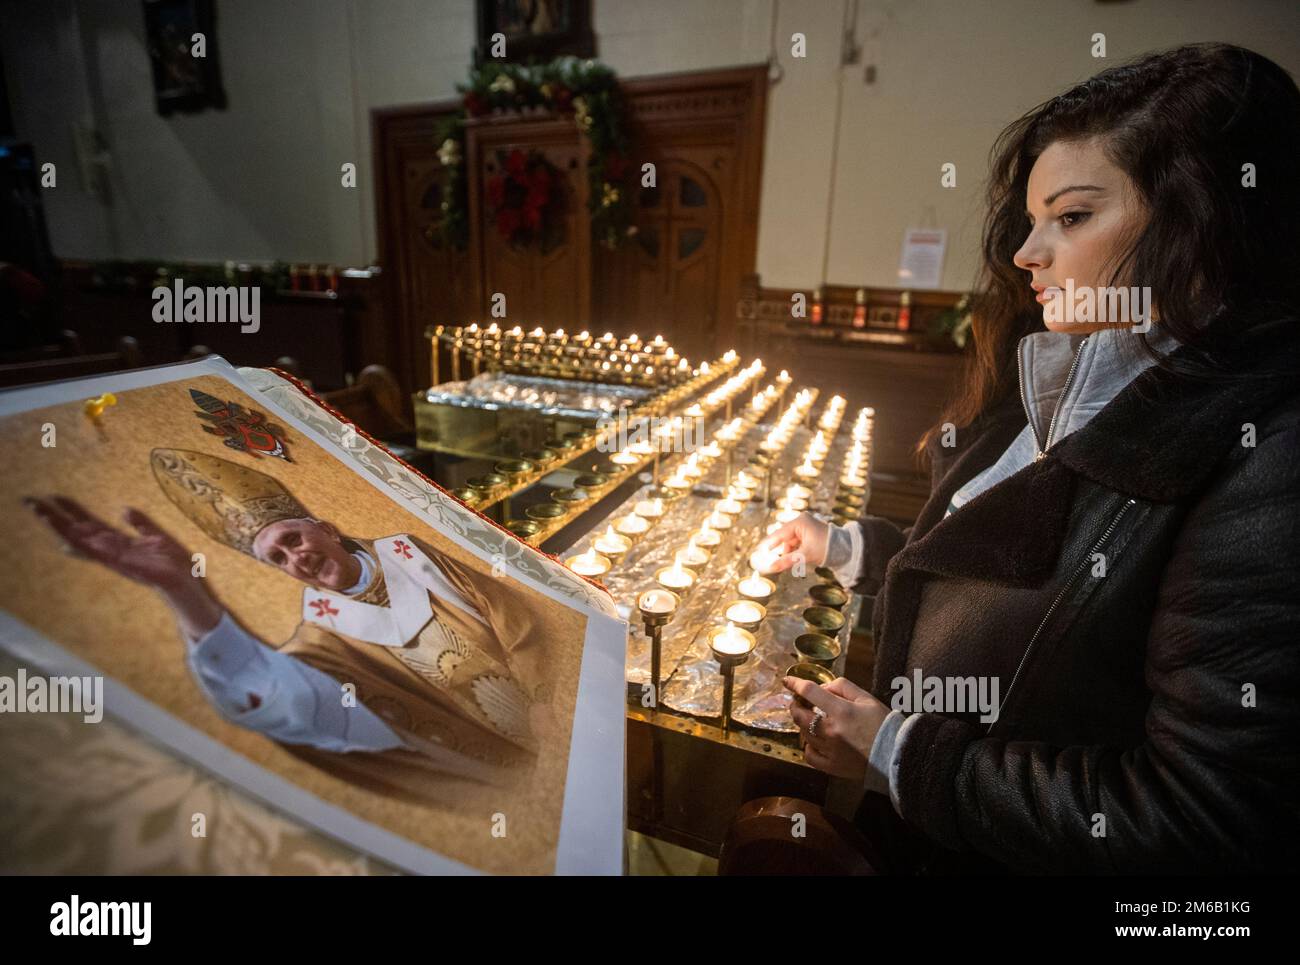 Lucy Knowles looks on at an image Pope Emeritus Benedict XVI as she lights a candle at St Mary’s Church in Belfast, Northern Ireland. Benedict, 95, died on Saturday after 10 years in an extraordinary papal retirement lived out in a monastery in the Vatican Gardens. Picture date: Tuesday January 3, 2023. Stock Photo